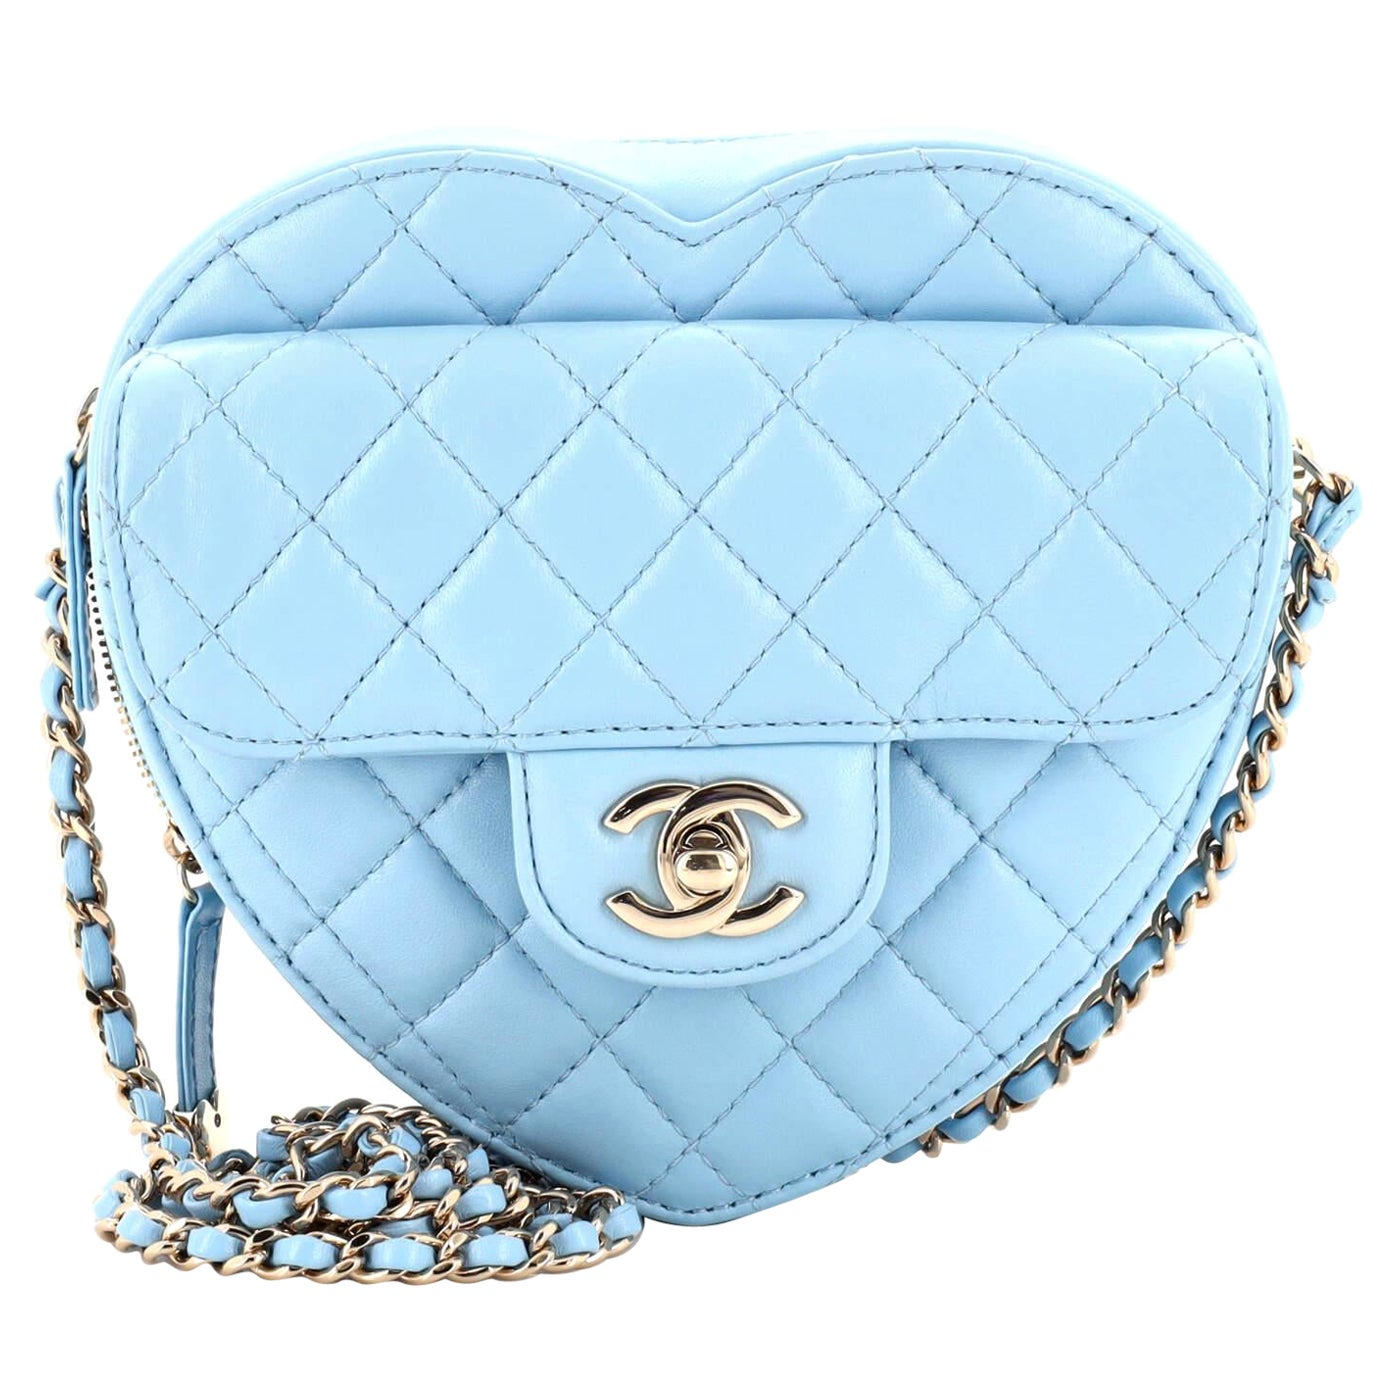 Chanel Shearling Flap Bag - 15 For Sale on 1stDibs